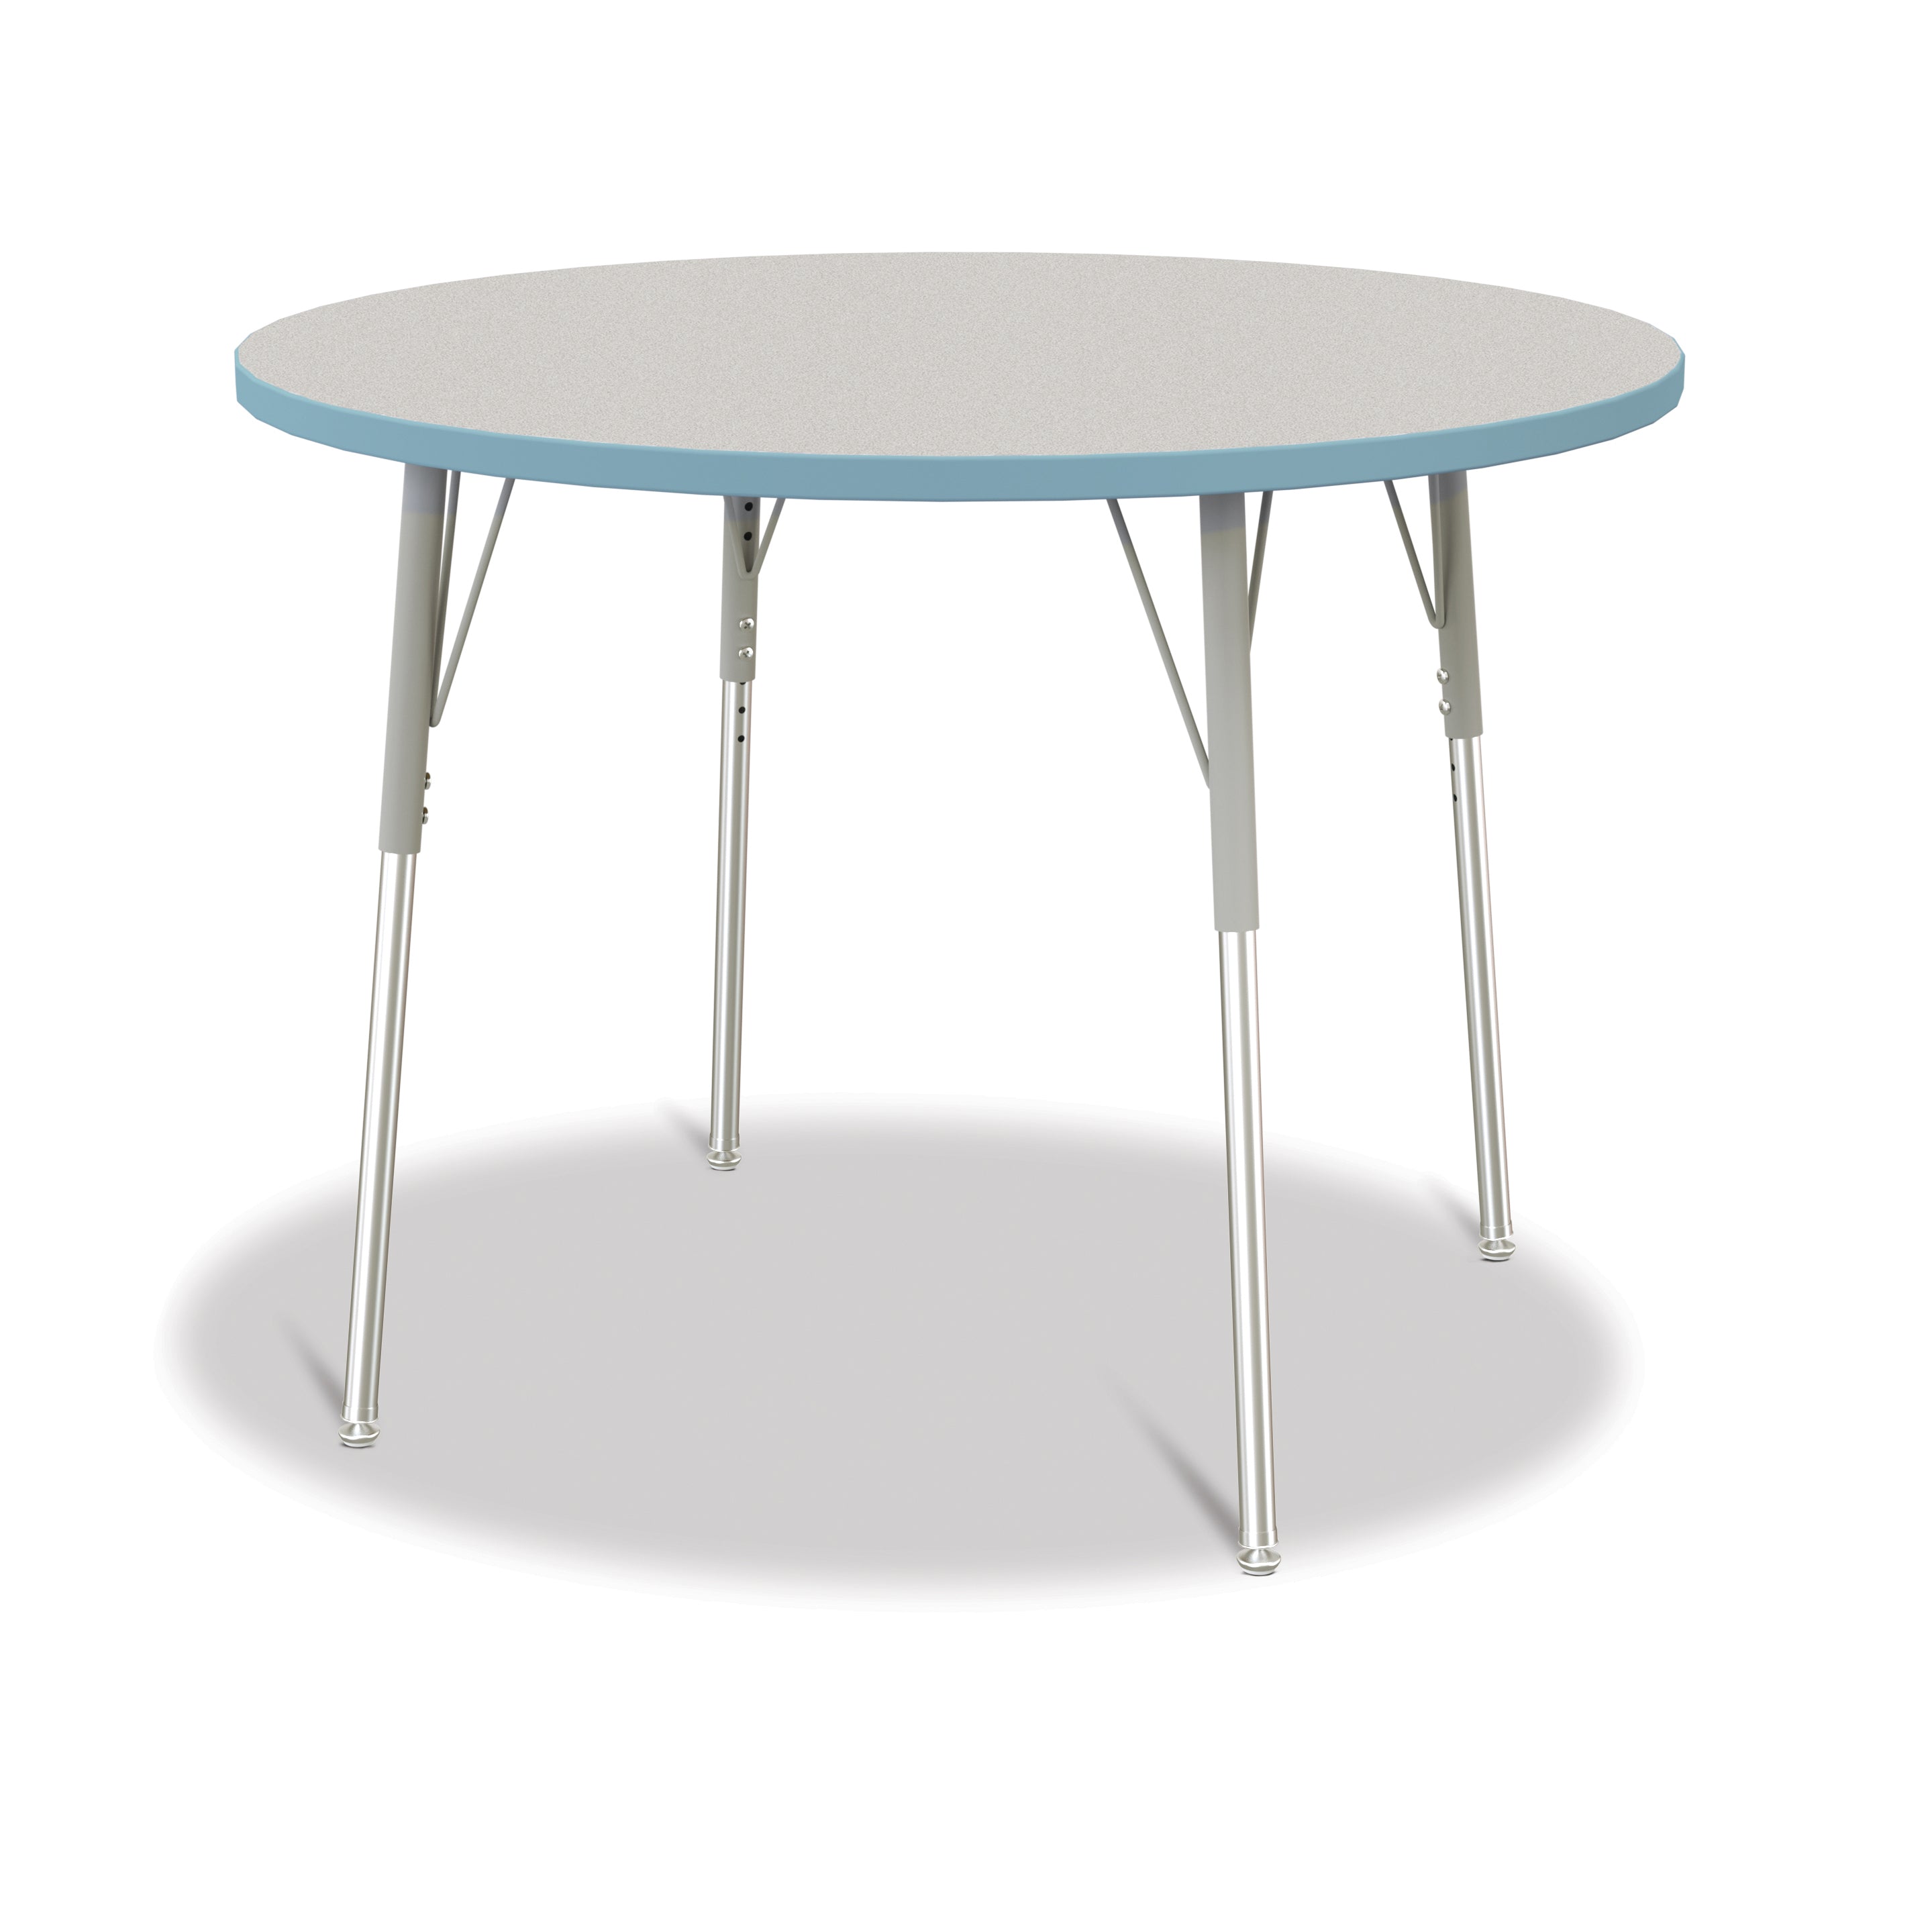 6468JCA131, Berries Round Activity Table - 42" Diameter, A-height - Freckled Gray/Coastal Blue/Gray